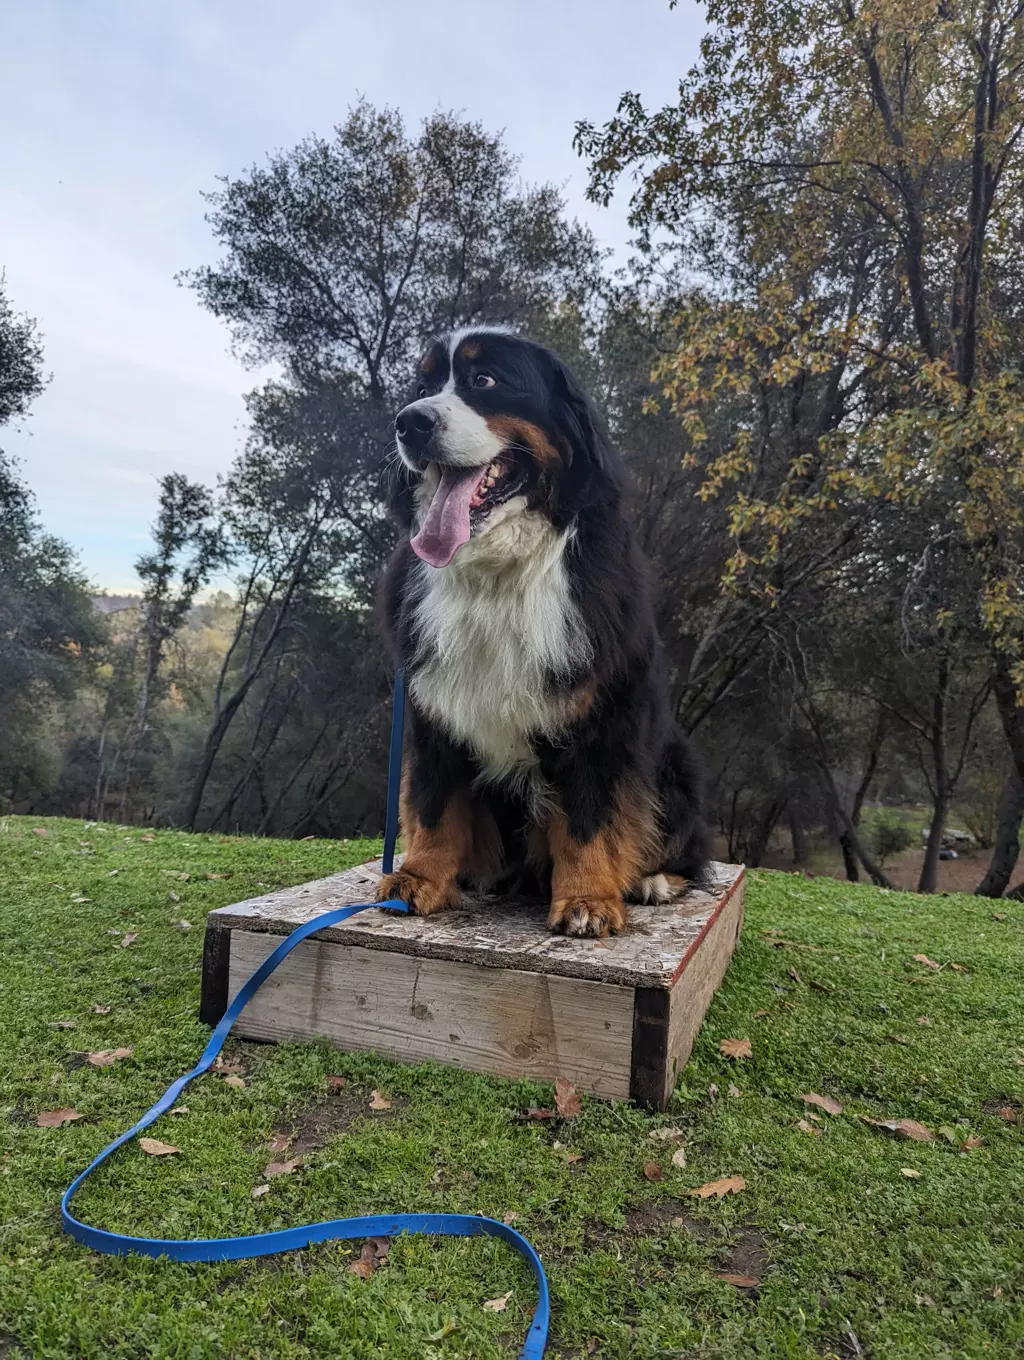 Bernese Mountain Dog sitting on wooden box outdoors.